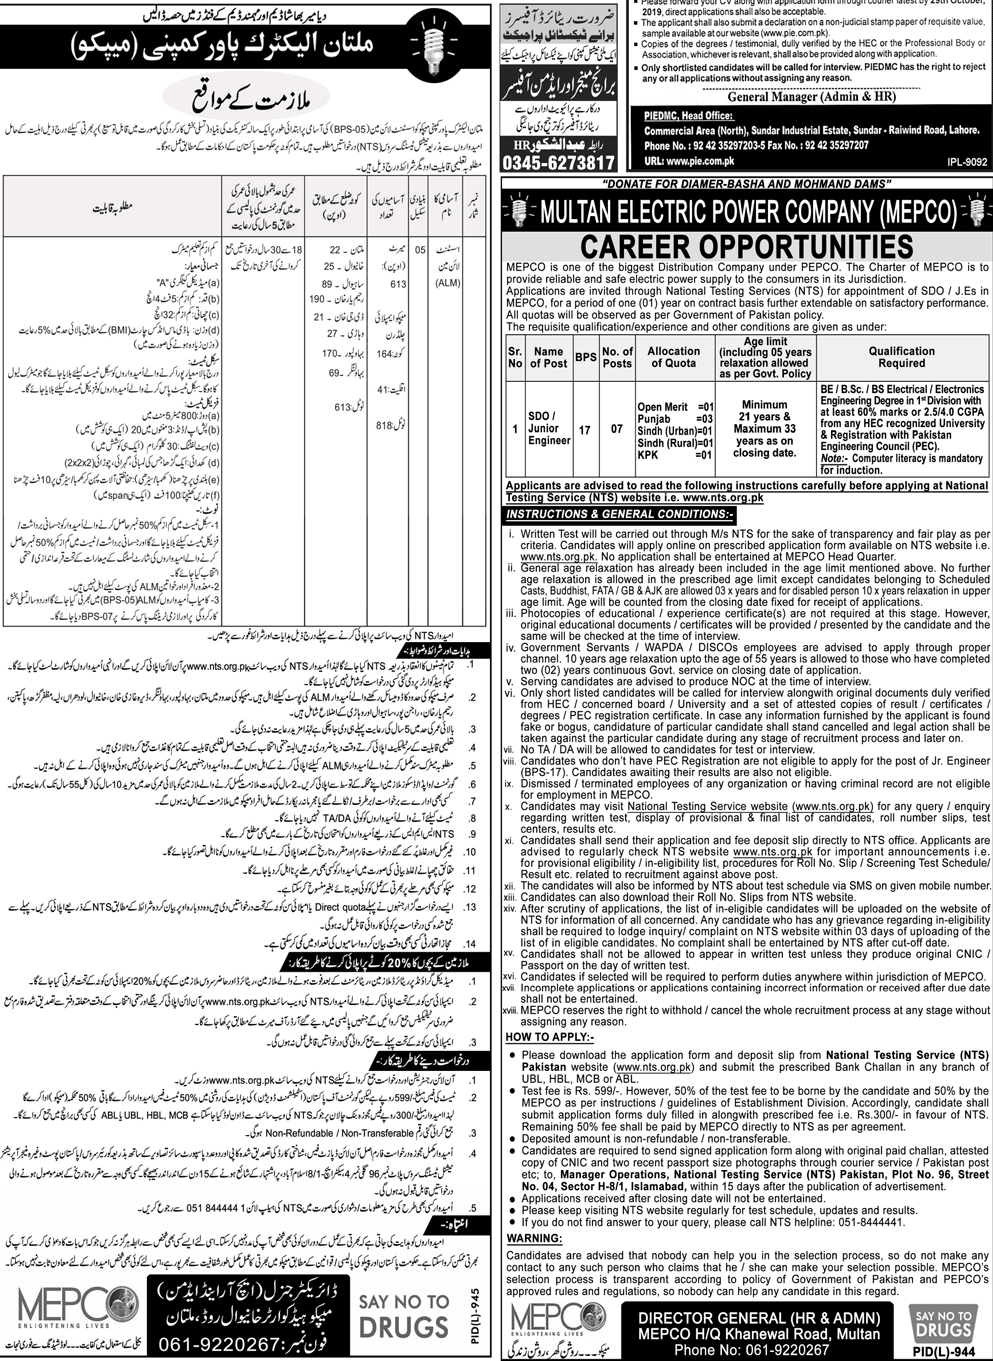 Jobs in MEPCO 2019 as Assistant Lineman and Others